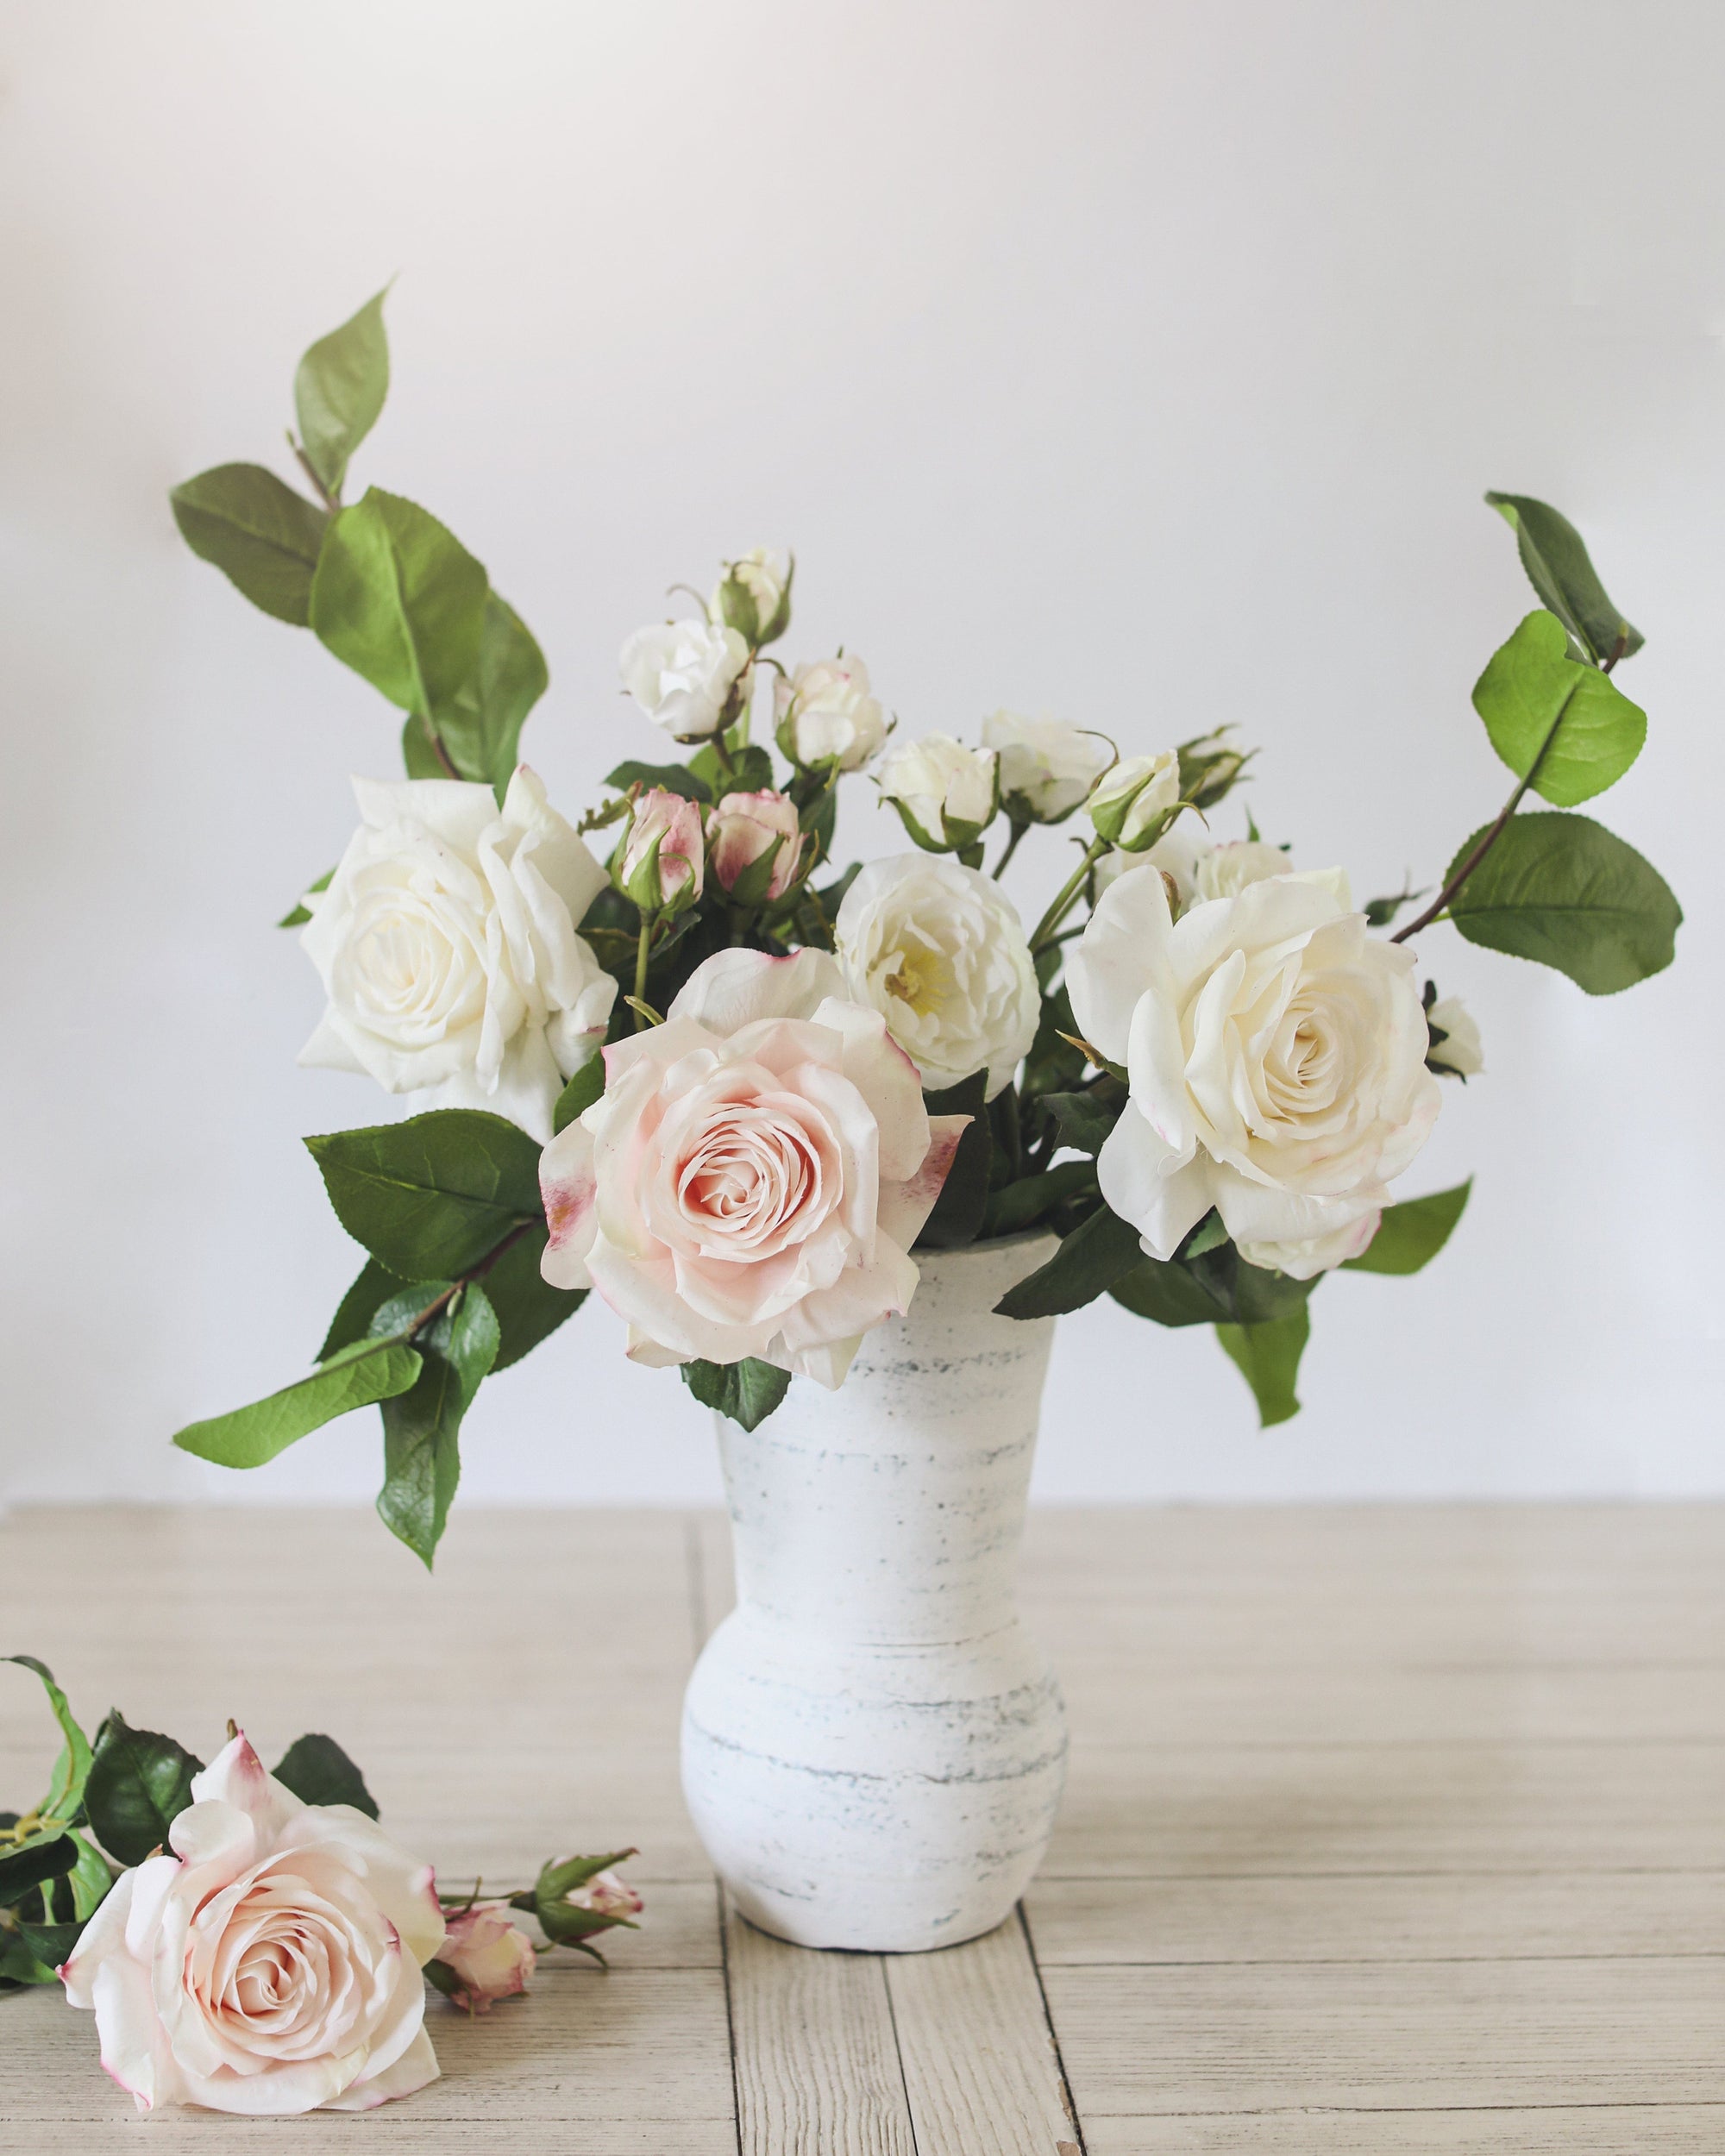 Artificial Roses with Stems- Real Touch Fake Flowers for Home de